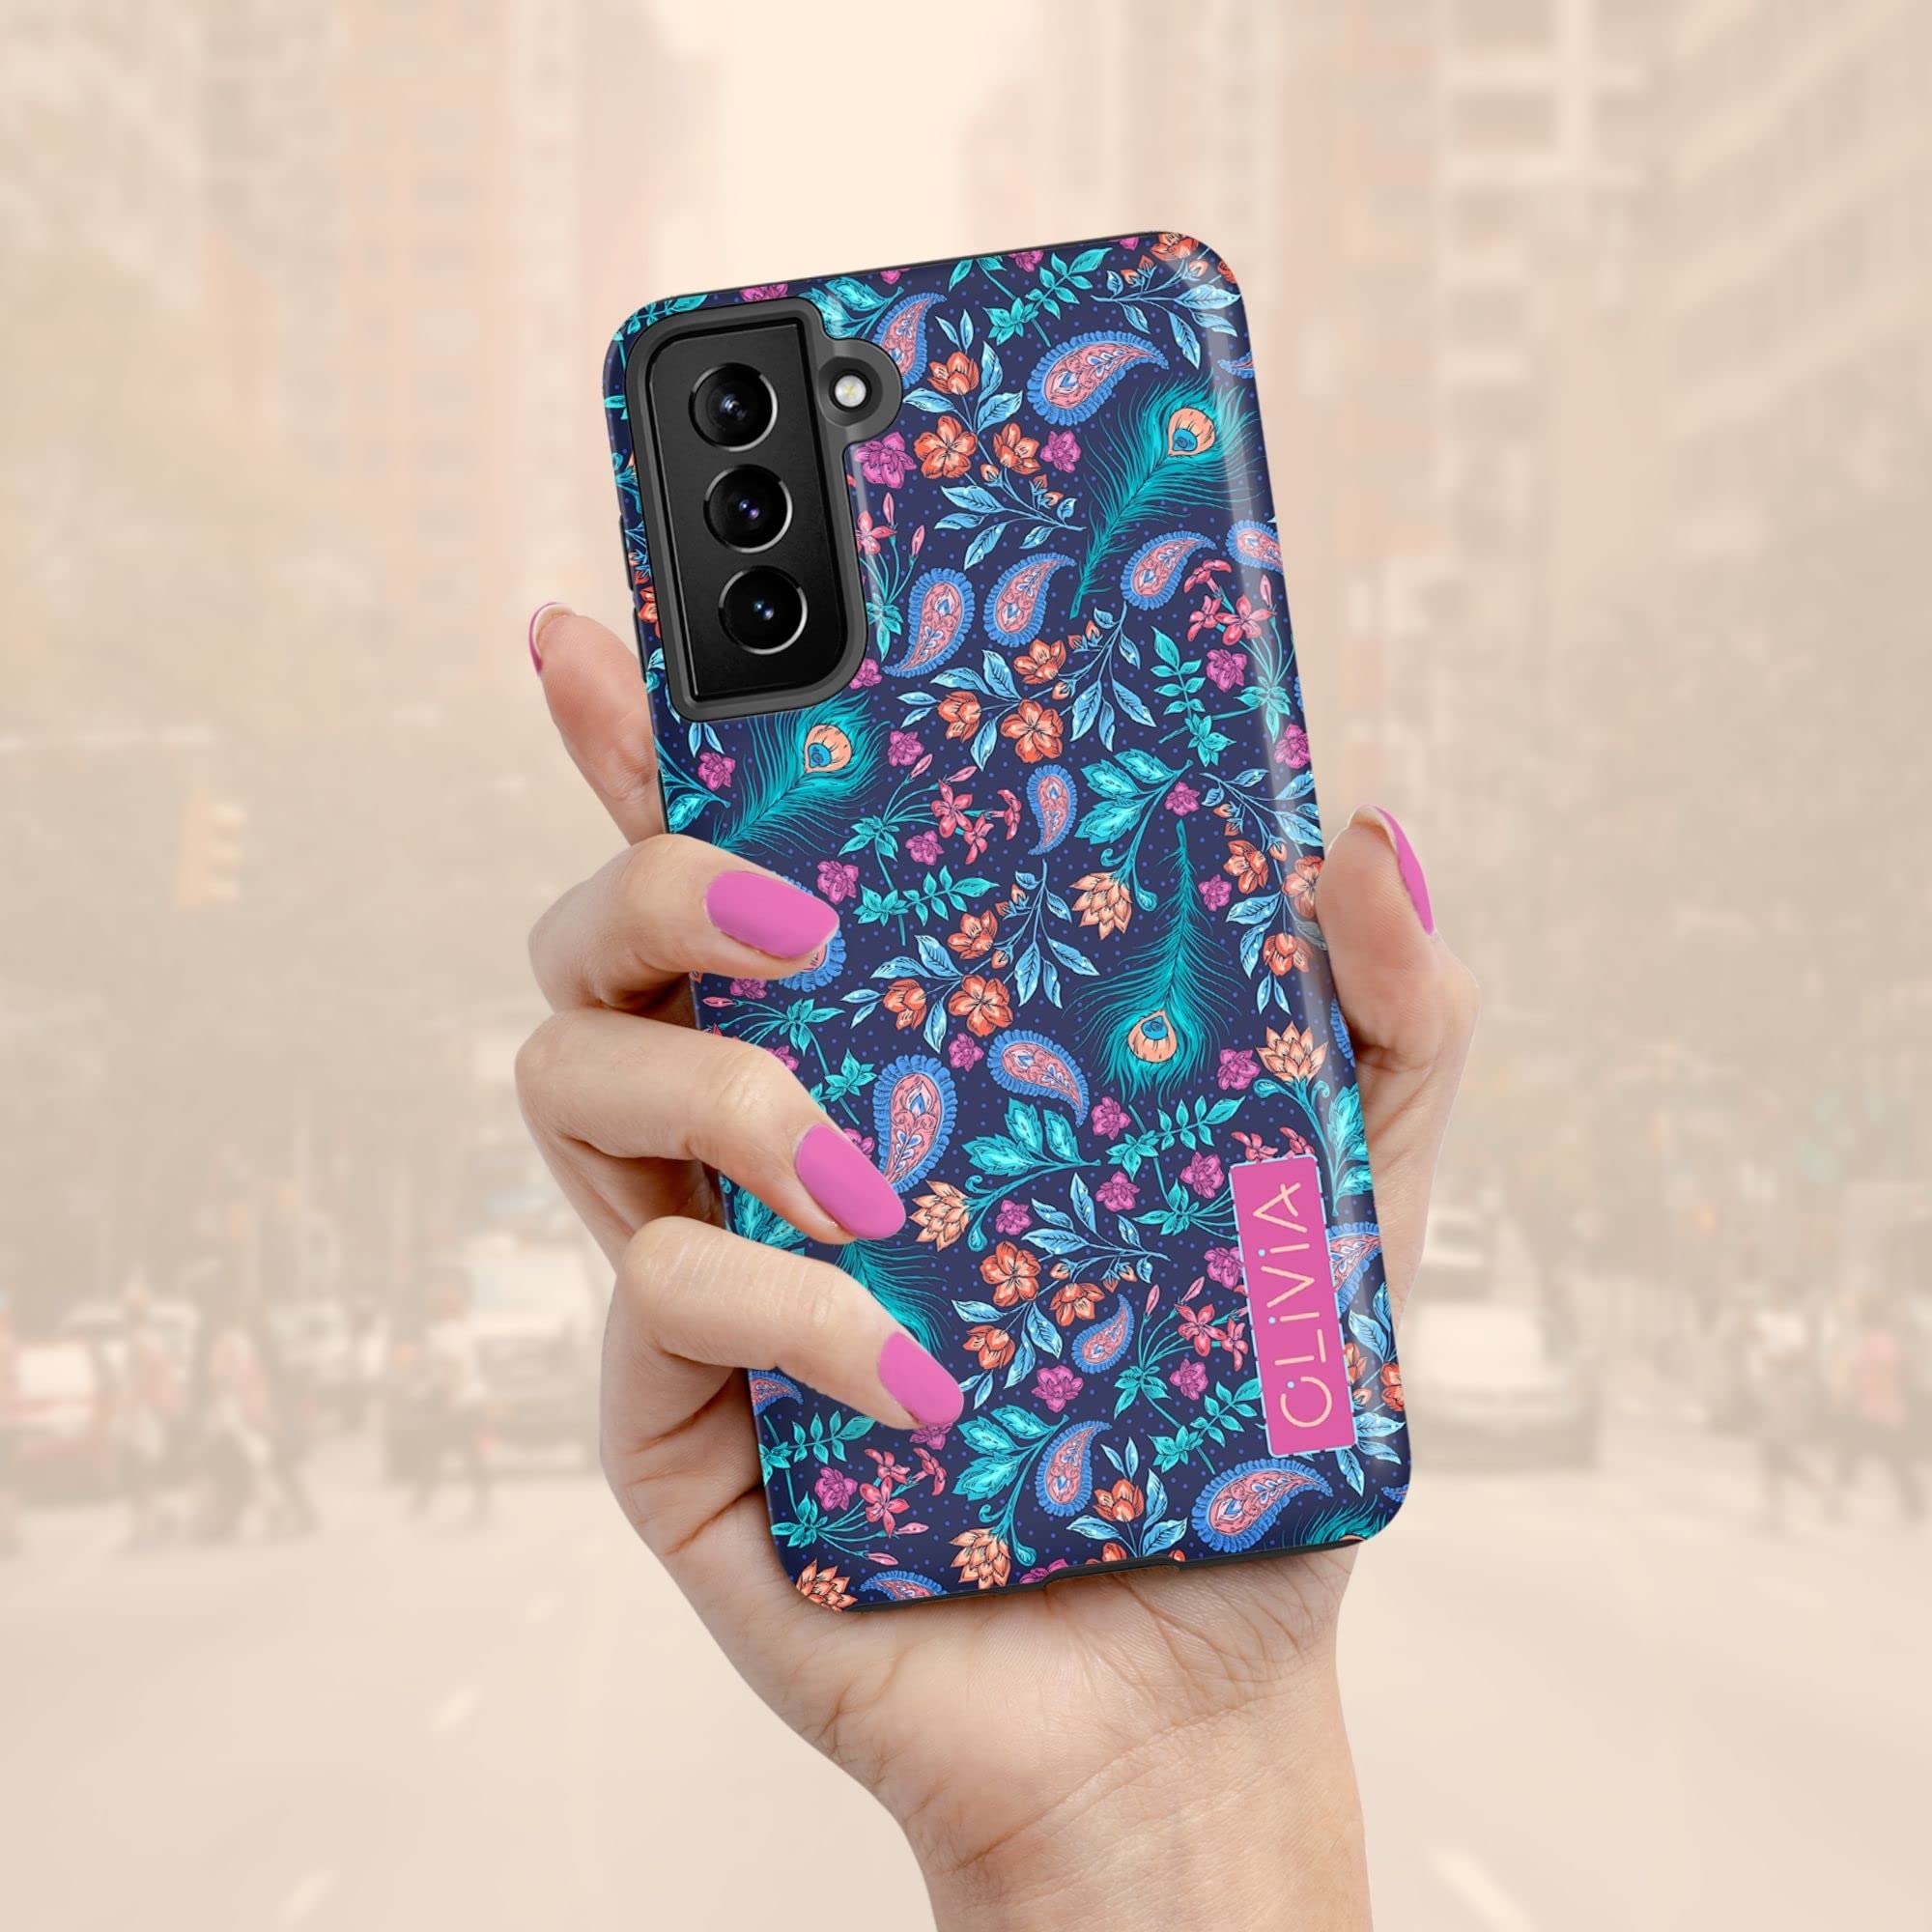 Artisticases Custom Paisley Floral Peacock Feathers Name Case, Personalized Case Designed for Samsung Galaxy S22 Plus, S21 Ultra, S20, S10e, S10, S9, S8, Note 20 Ultra, Note 10 Plus, Note 9, Note 8